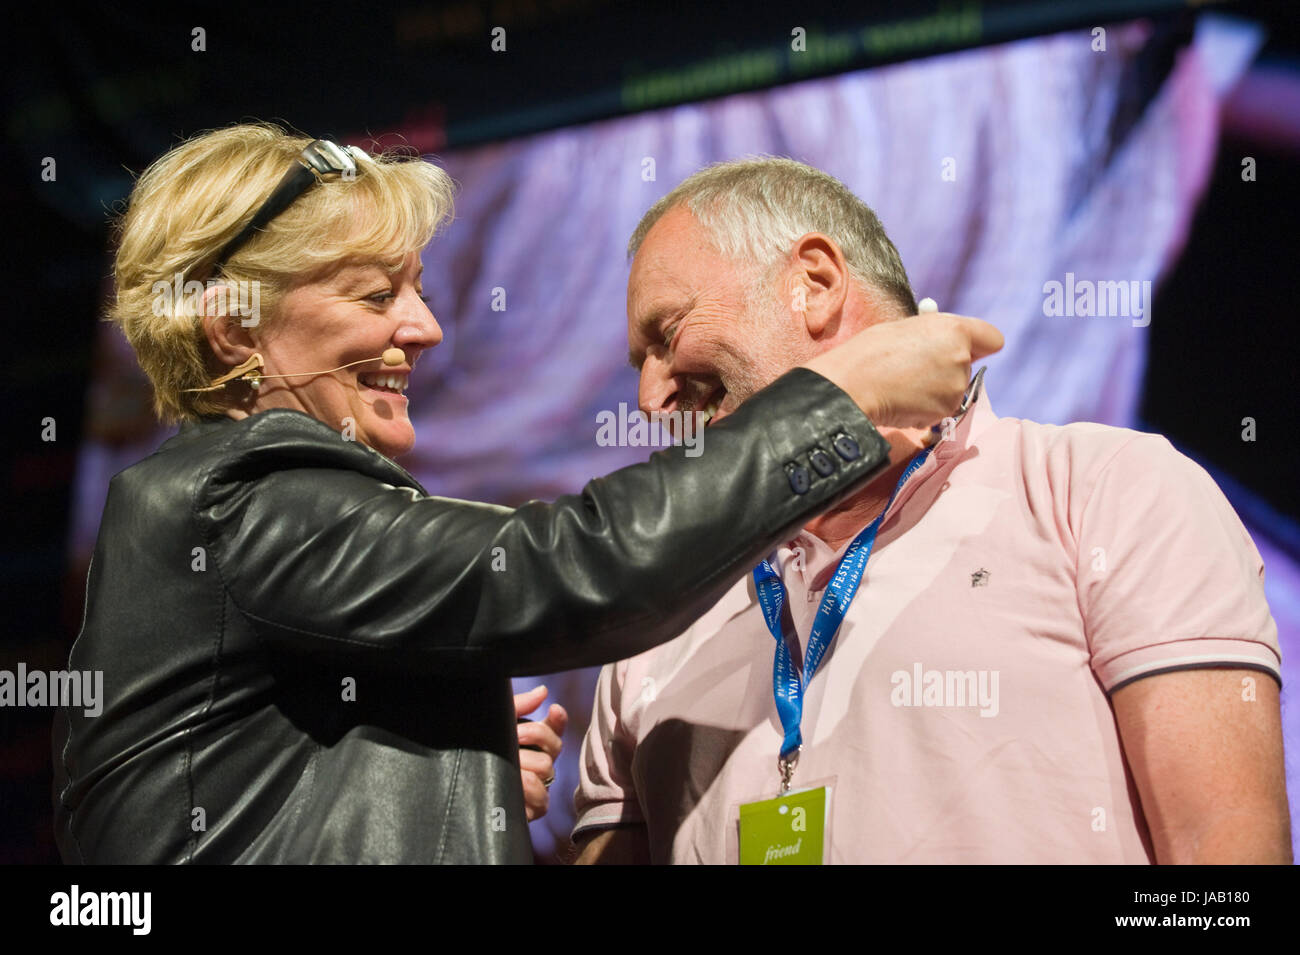 Jo Malone perfumer trying out a fragrance on a member of the audience on stage at Hay Festival 2017 Hay-on-Wye Powys Wales UK Stock Photo